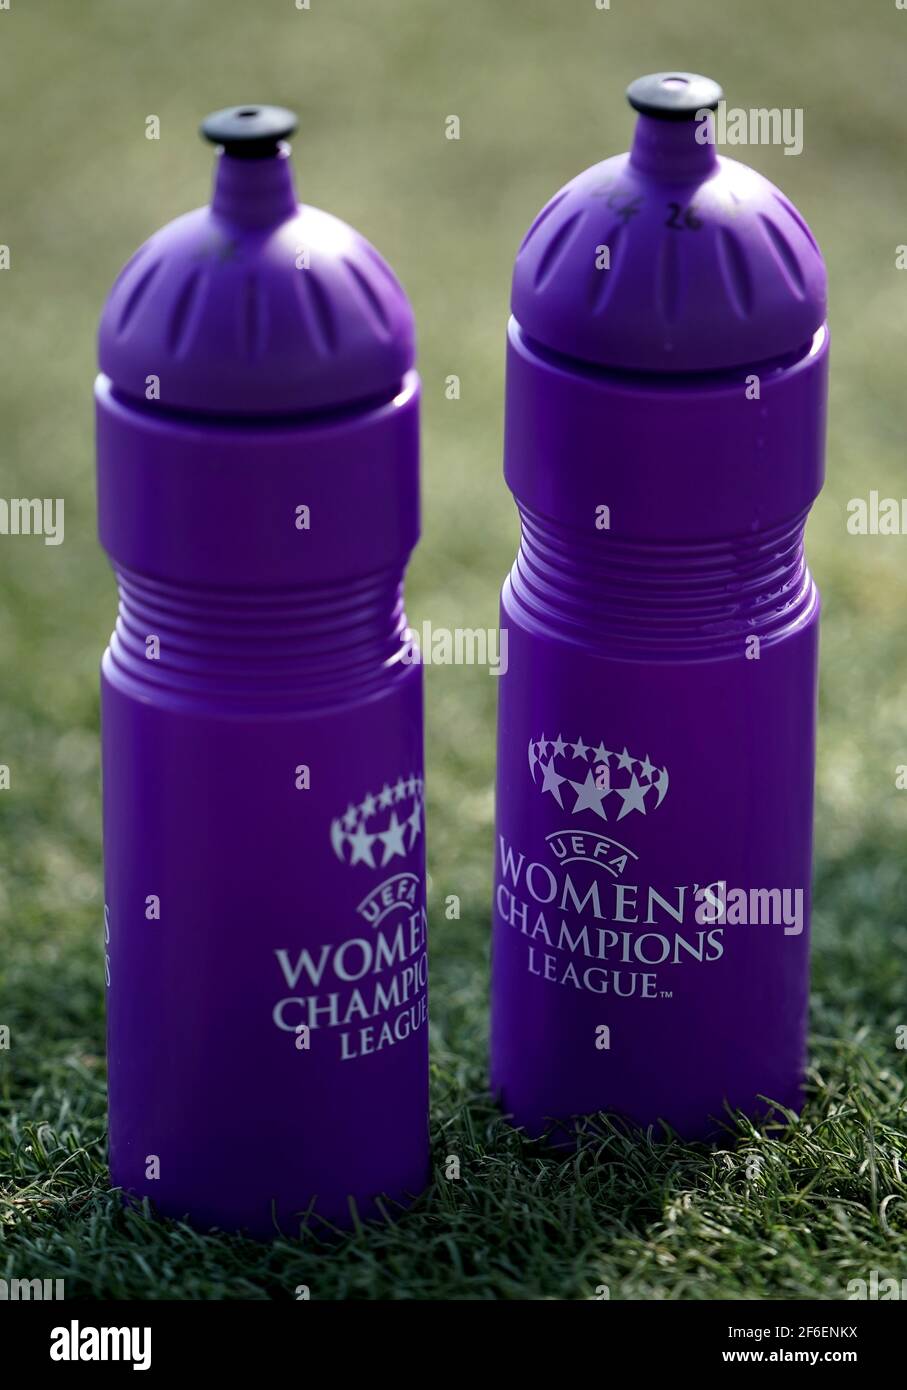 UEFA Women's Champions League branded drinks bottles during the 2021 UEFA Women's Champions League match at the Manchester City Academy Stadium, Manchester. Picture date: Wednesday March 31, 2021. Stock Photo